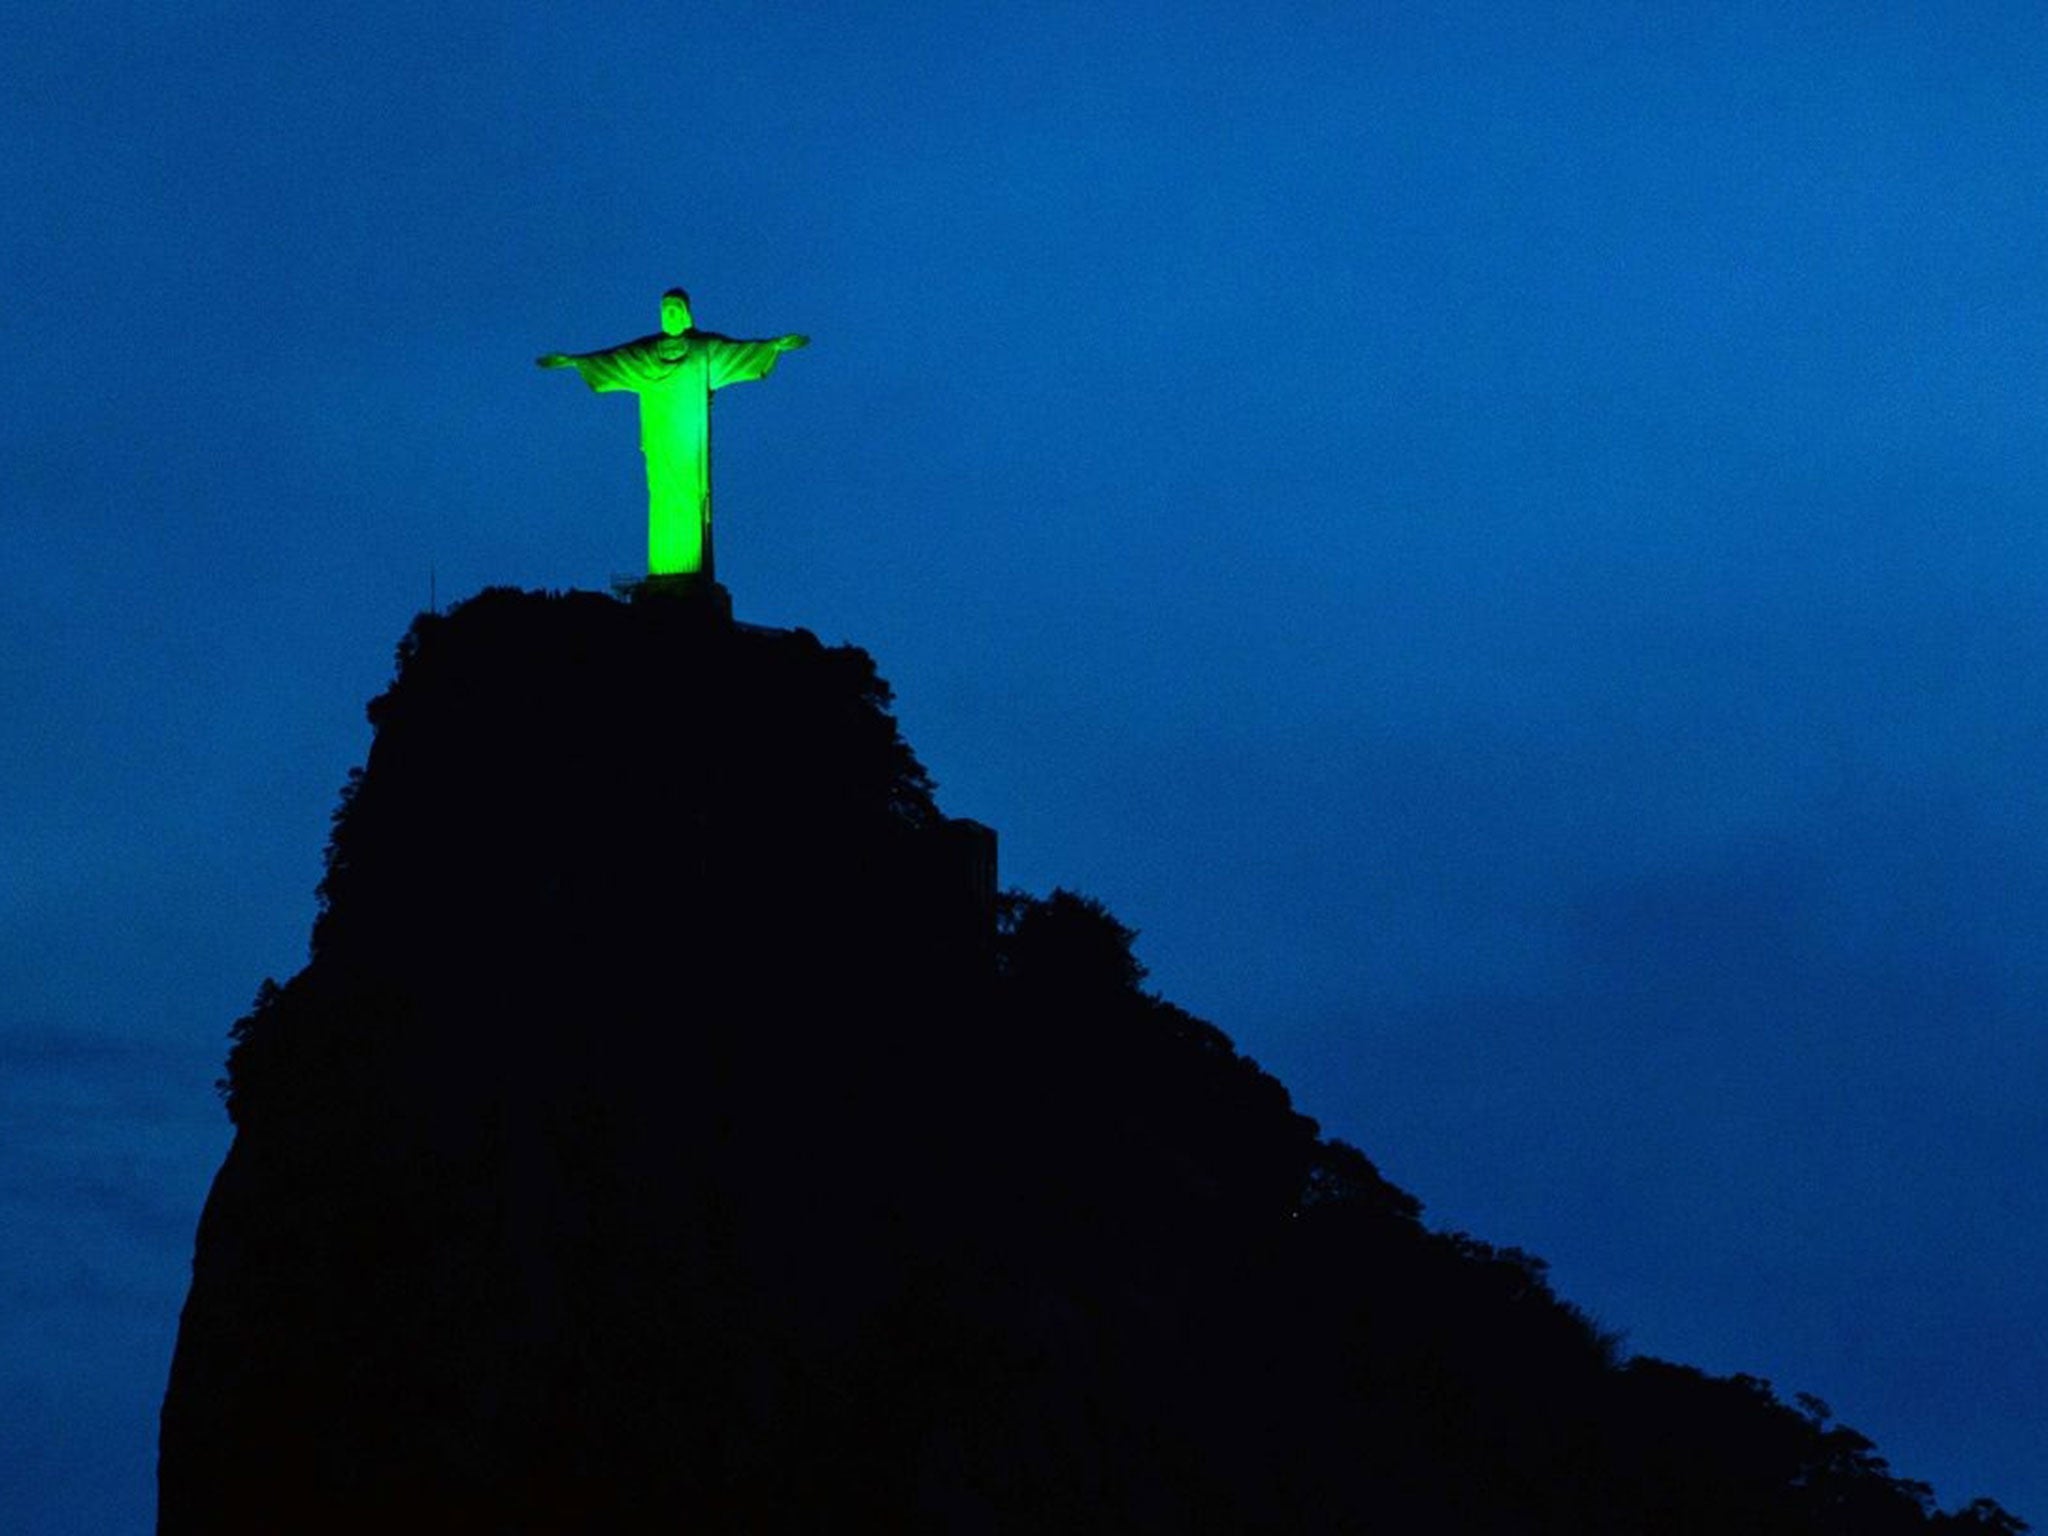 View of the statue of Christ the Redeemer illuminated in green to celebrate the upcoming Irish festivity of Saint Patrick's Day, atop Corcovado hill in Rio de Janeiro, Brazil, on March 15, 2015.